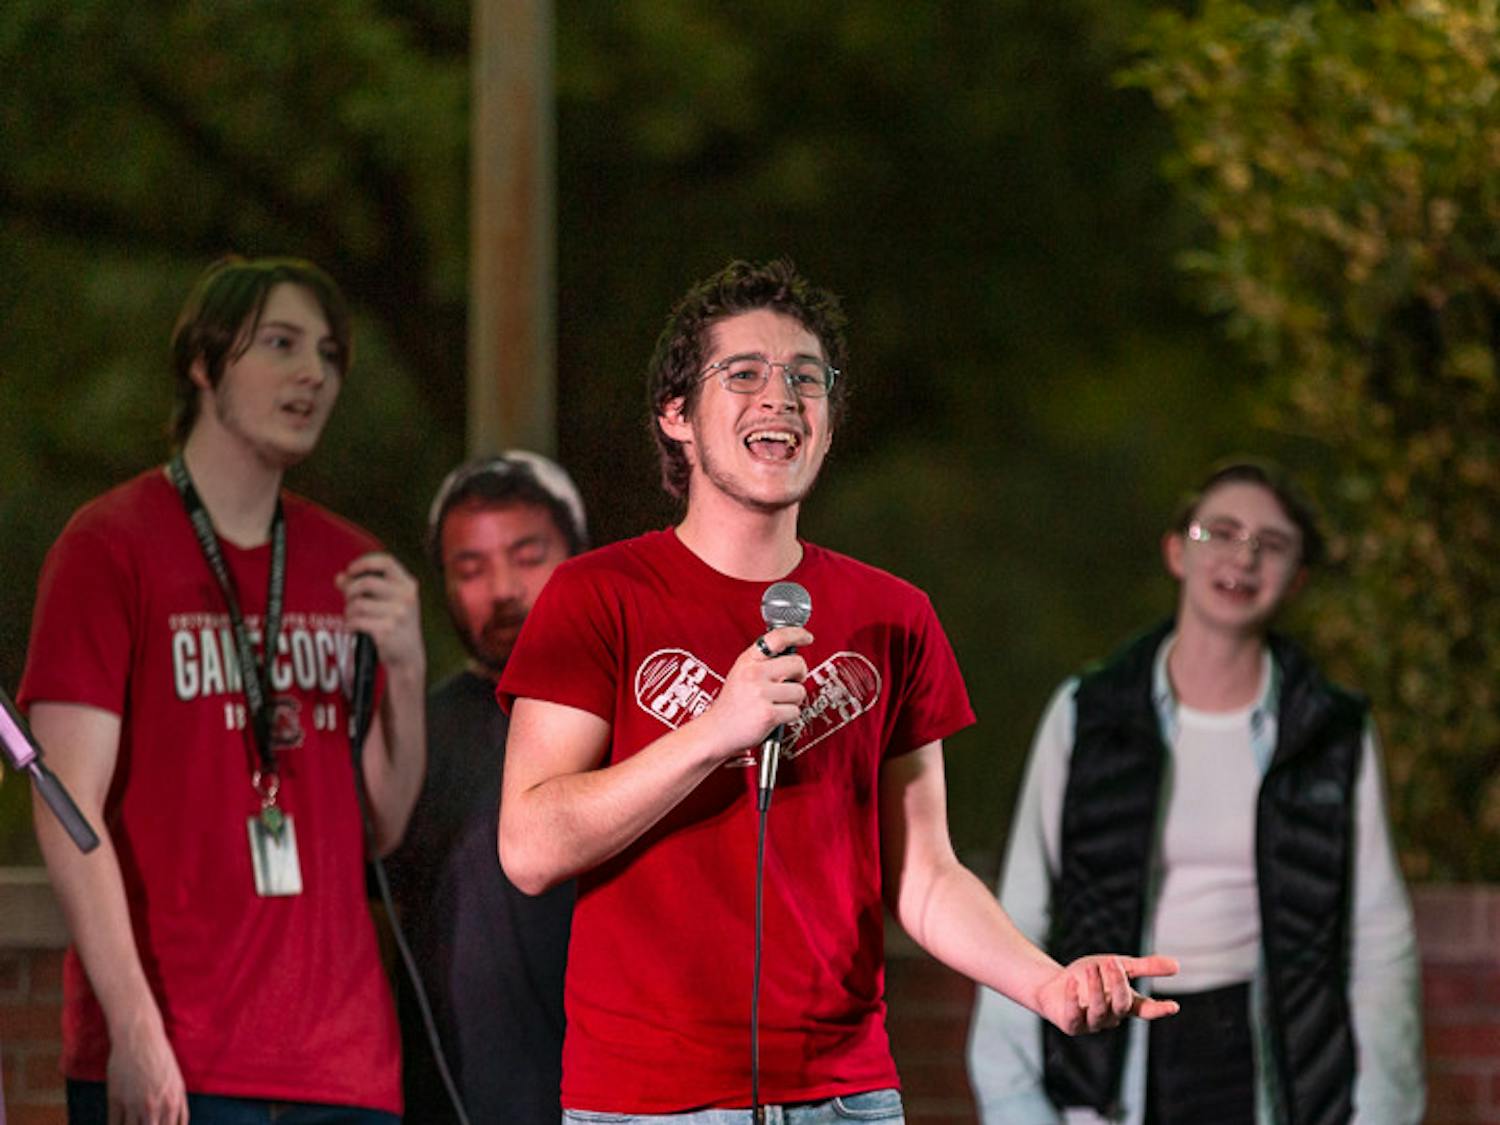 Second-year computer science student Wyatt Carhart sings during The Resonance's set at the Battle of the Bands on Oct. 5, 2022. The competition brought acappella, folk, rap, and rock music to the Russell House Patio in a variety of performances.